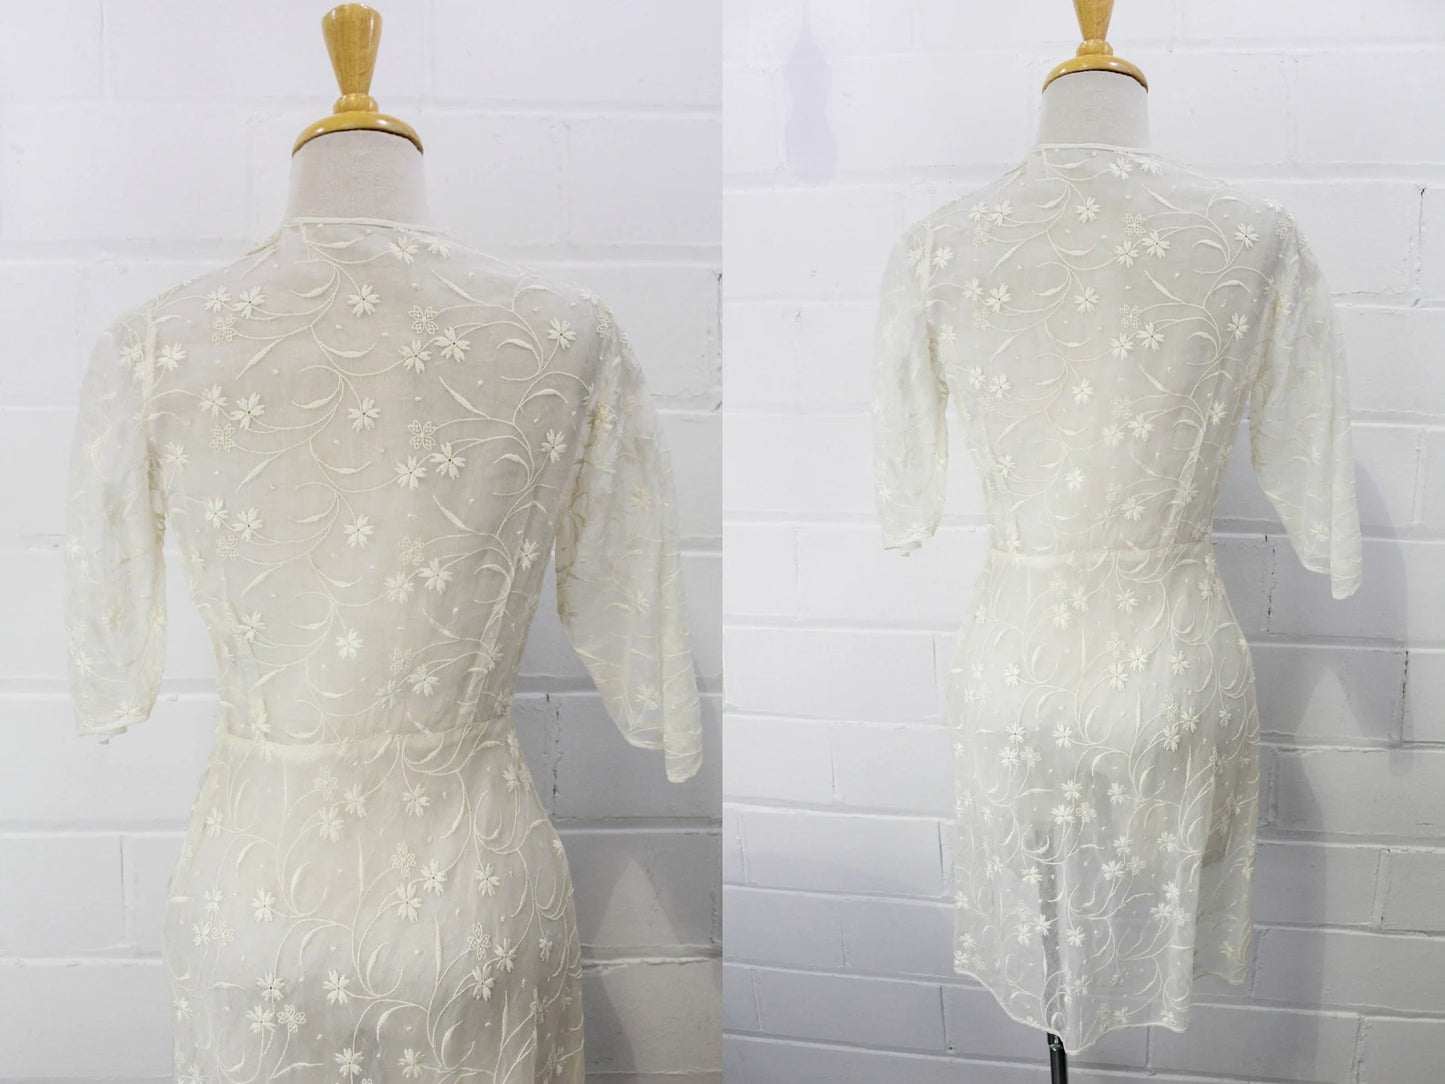 1930s Organza Embroidered Bed Jacket, Antique 30s Sheer Open Jacket with Sleeves Floral Embroidery, Size Small, Bust 34"